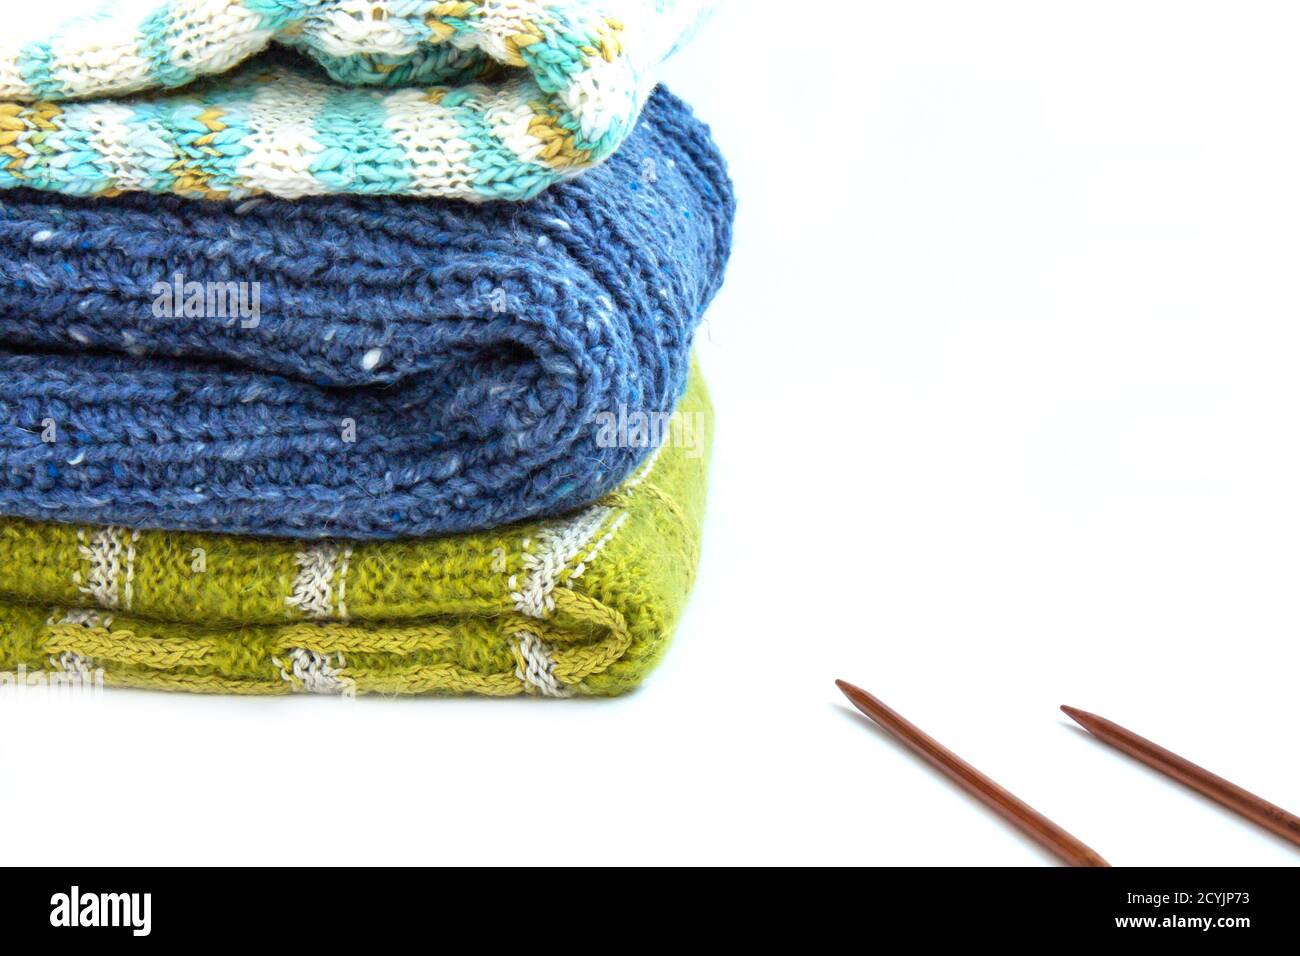 Stack of blue, brown, green knitted sweaters and knitting needles on a white background. Home comfort. Casual wear. Autumn mood. Concept of autumn tid Stock Photo